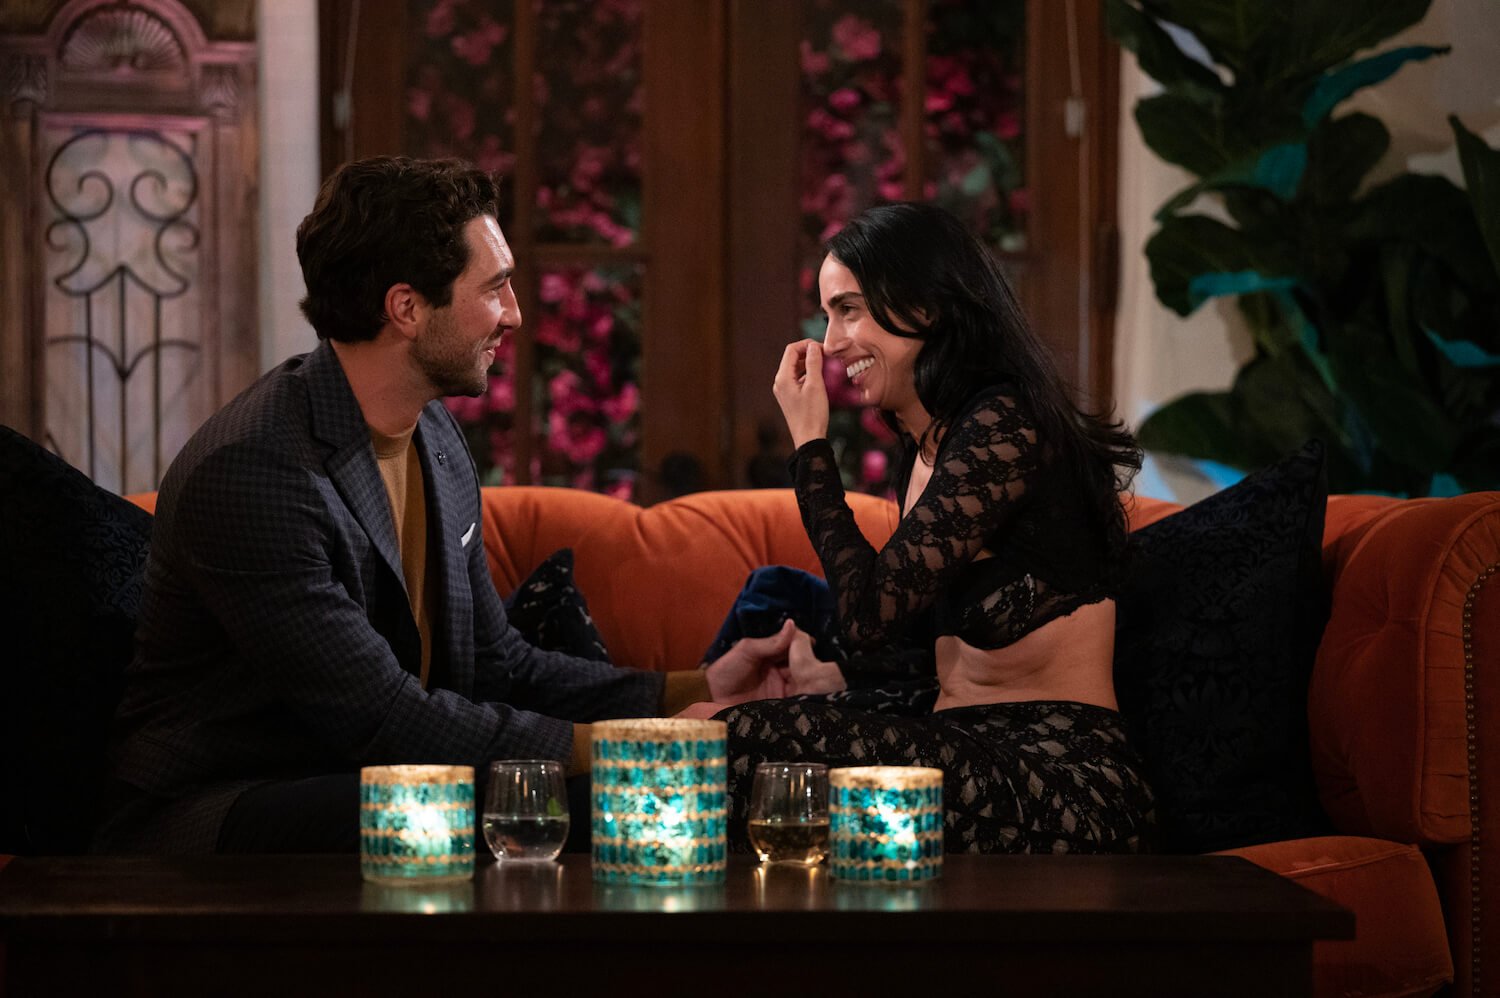 'The Bachelor' Season 28 star Joey Graziadei speaking to Maria Georgas on the couch